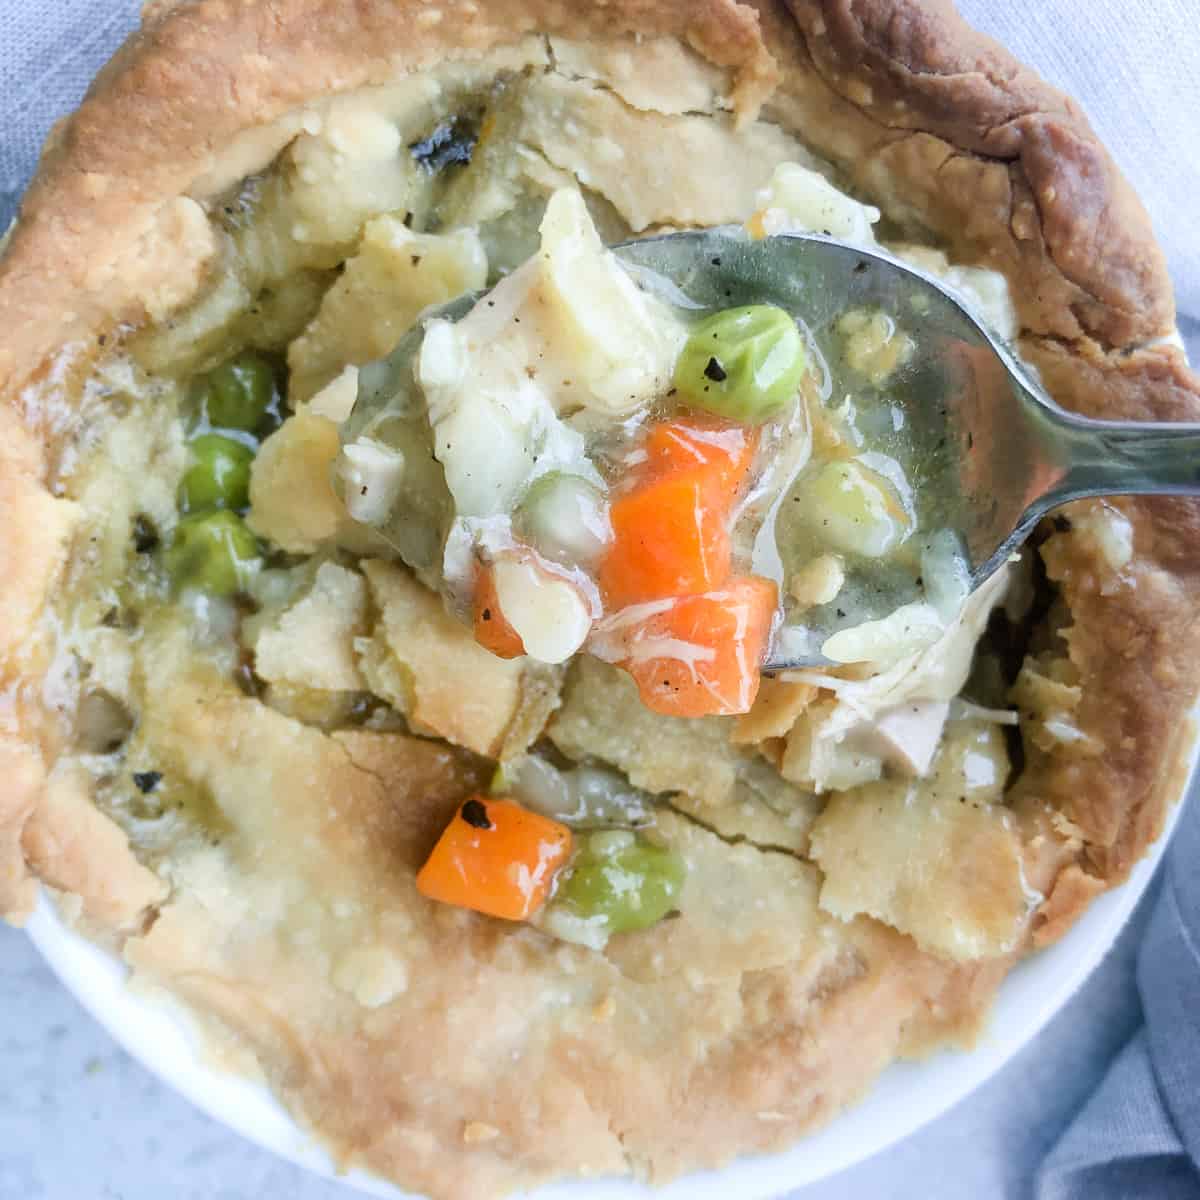 Chicken pot pie filling on spoon over baked pie.